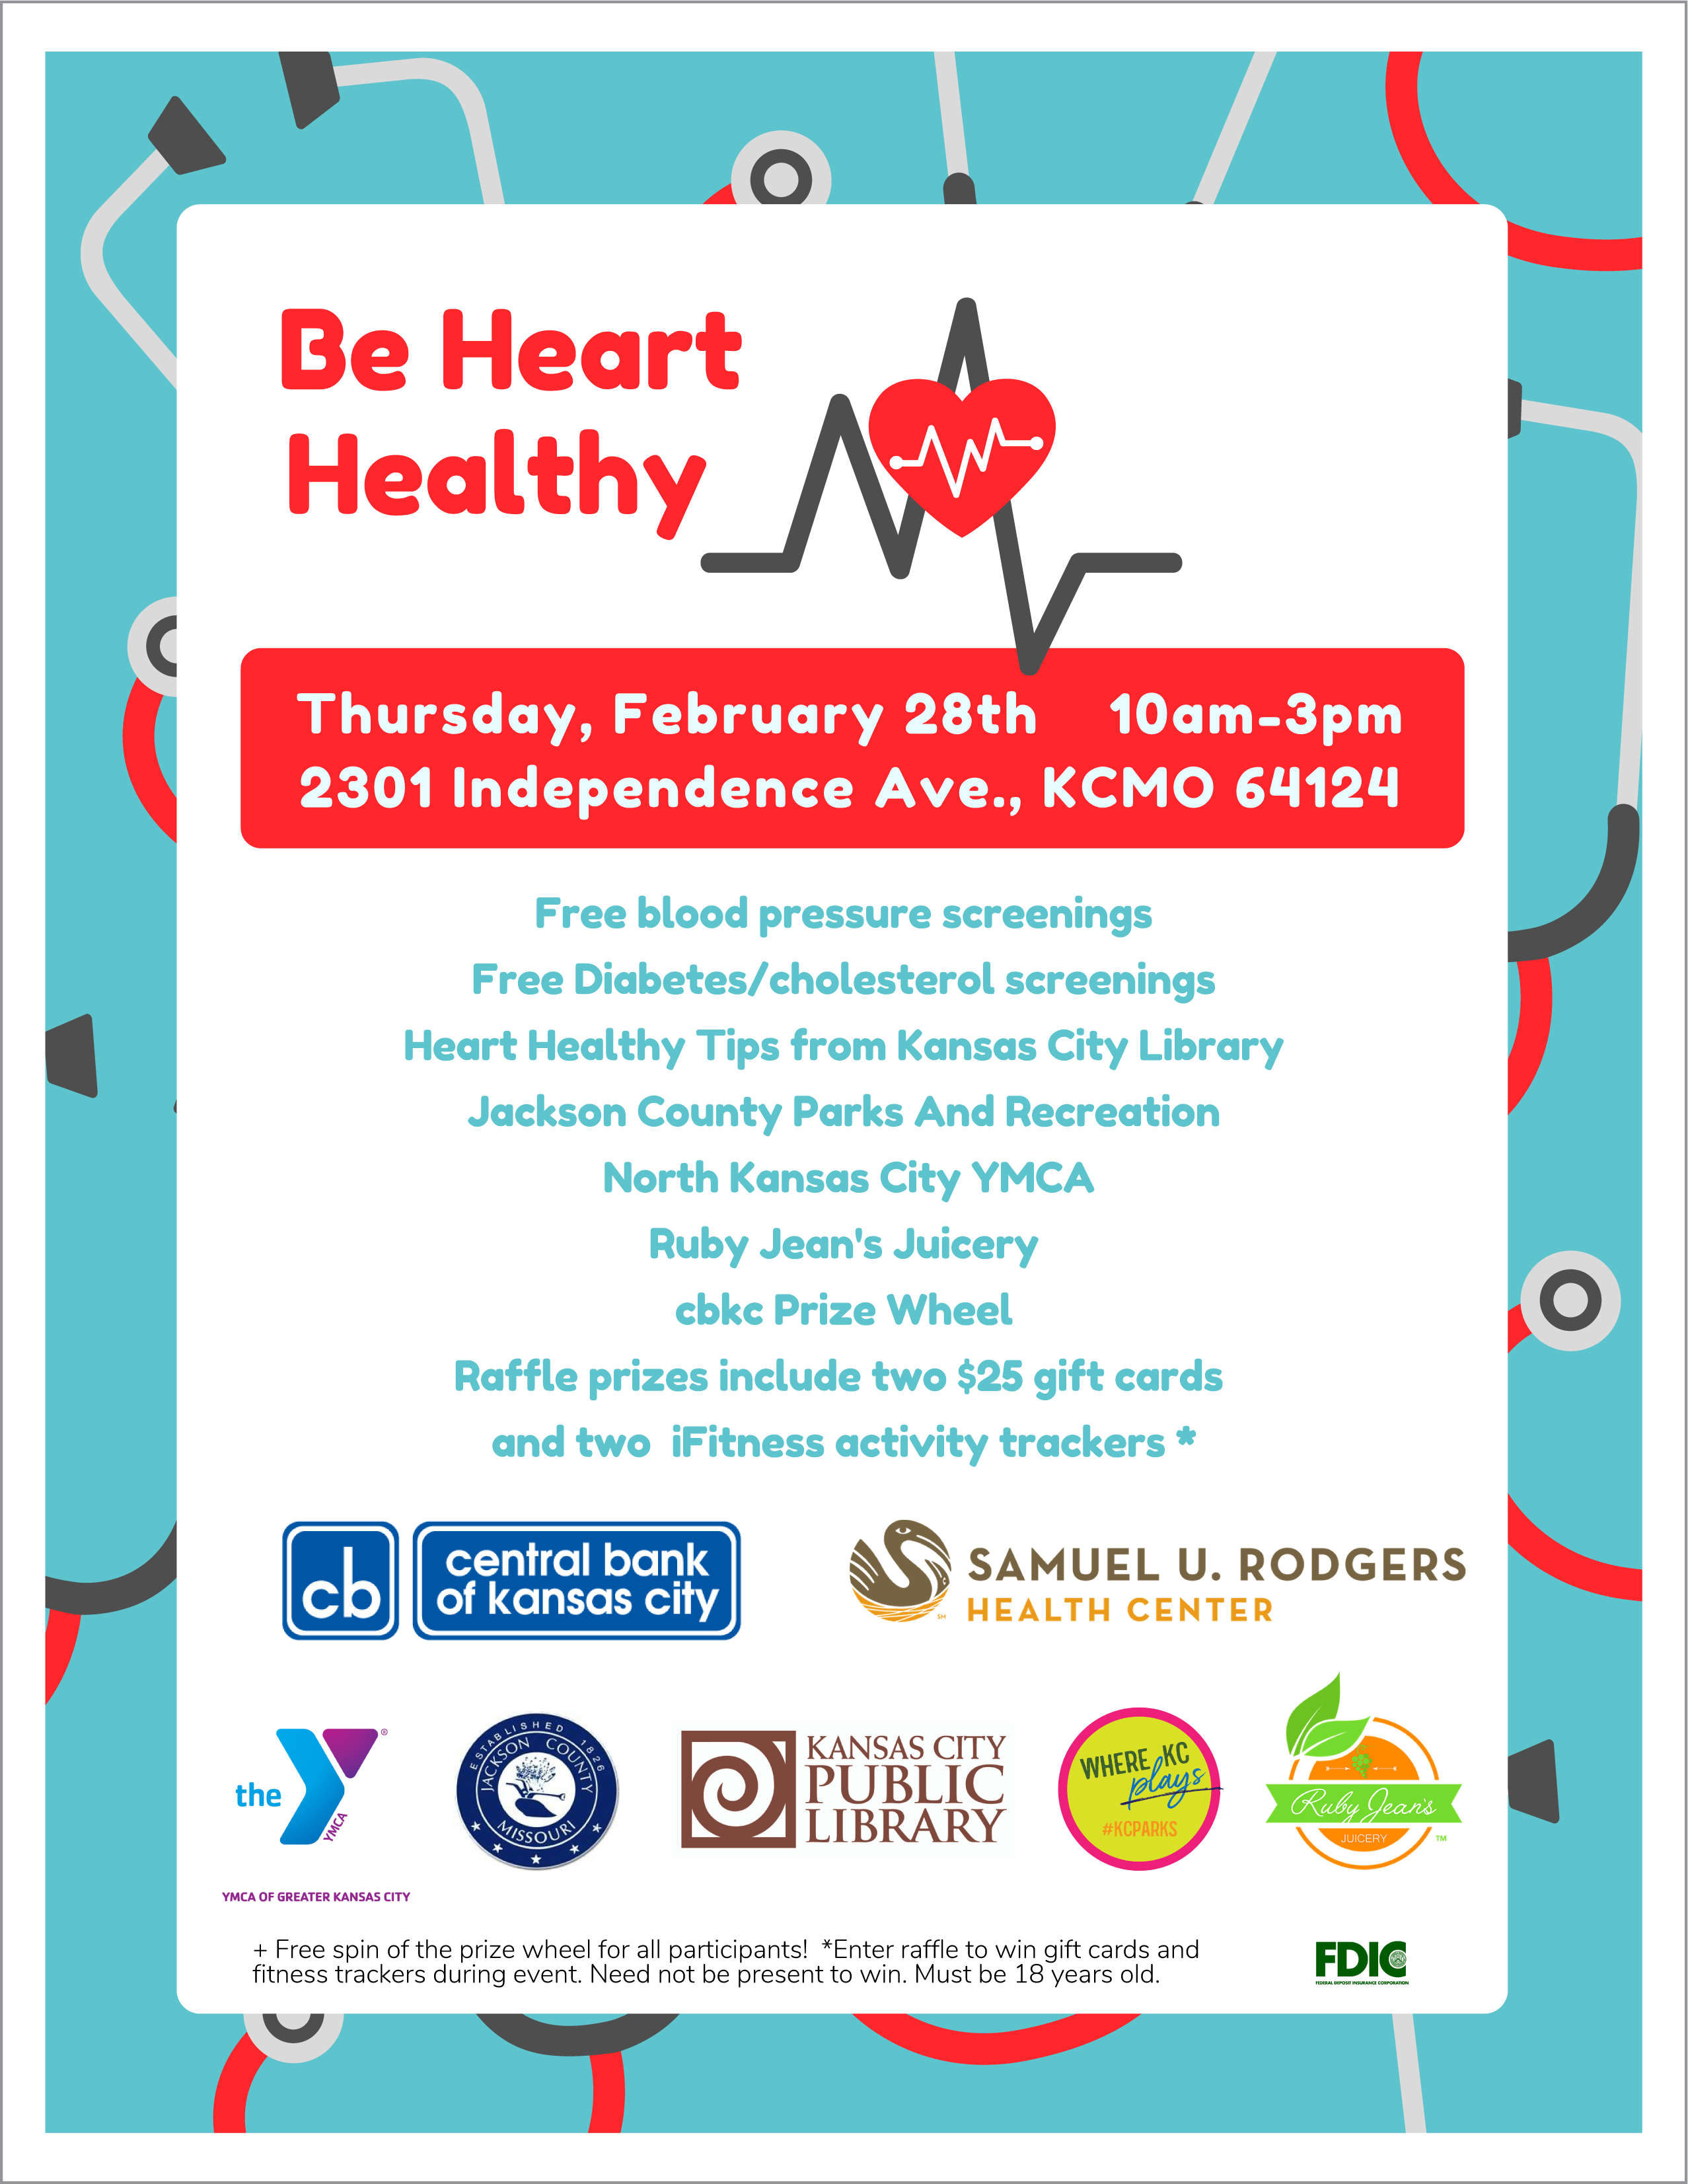 Be Hearth Healthy - Hosted by Central Bank of Kansas City